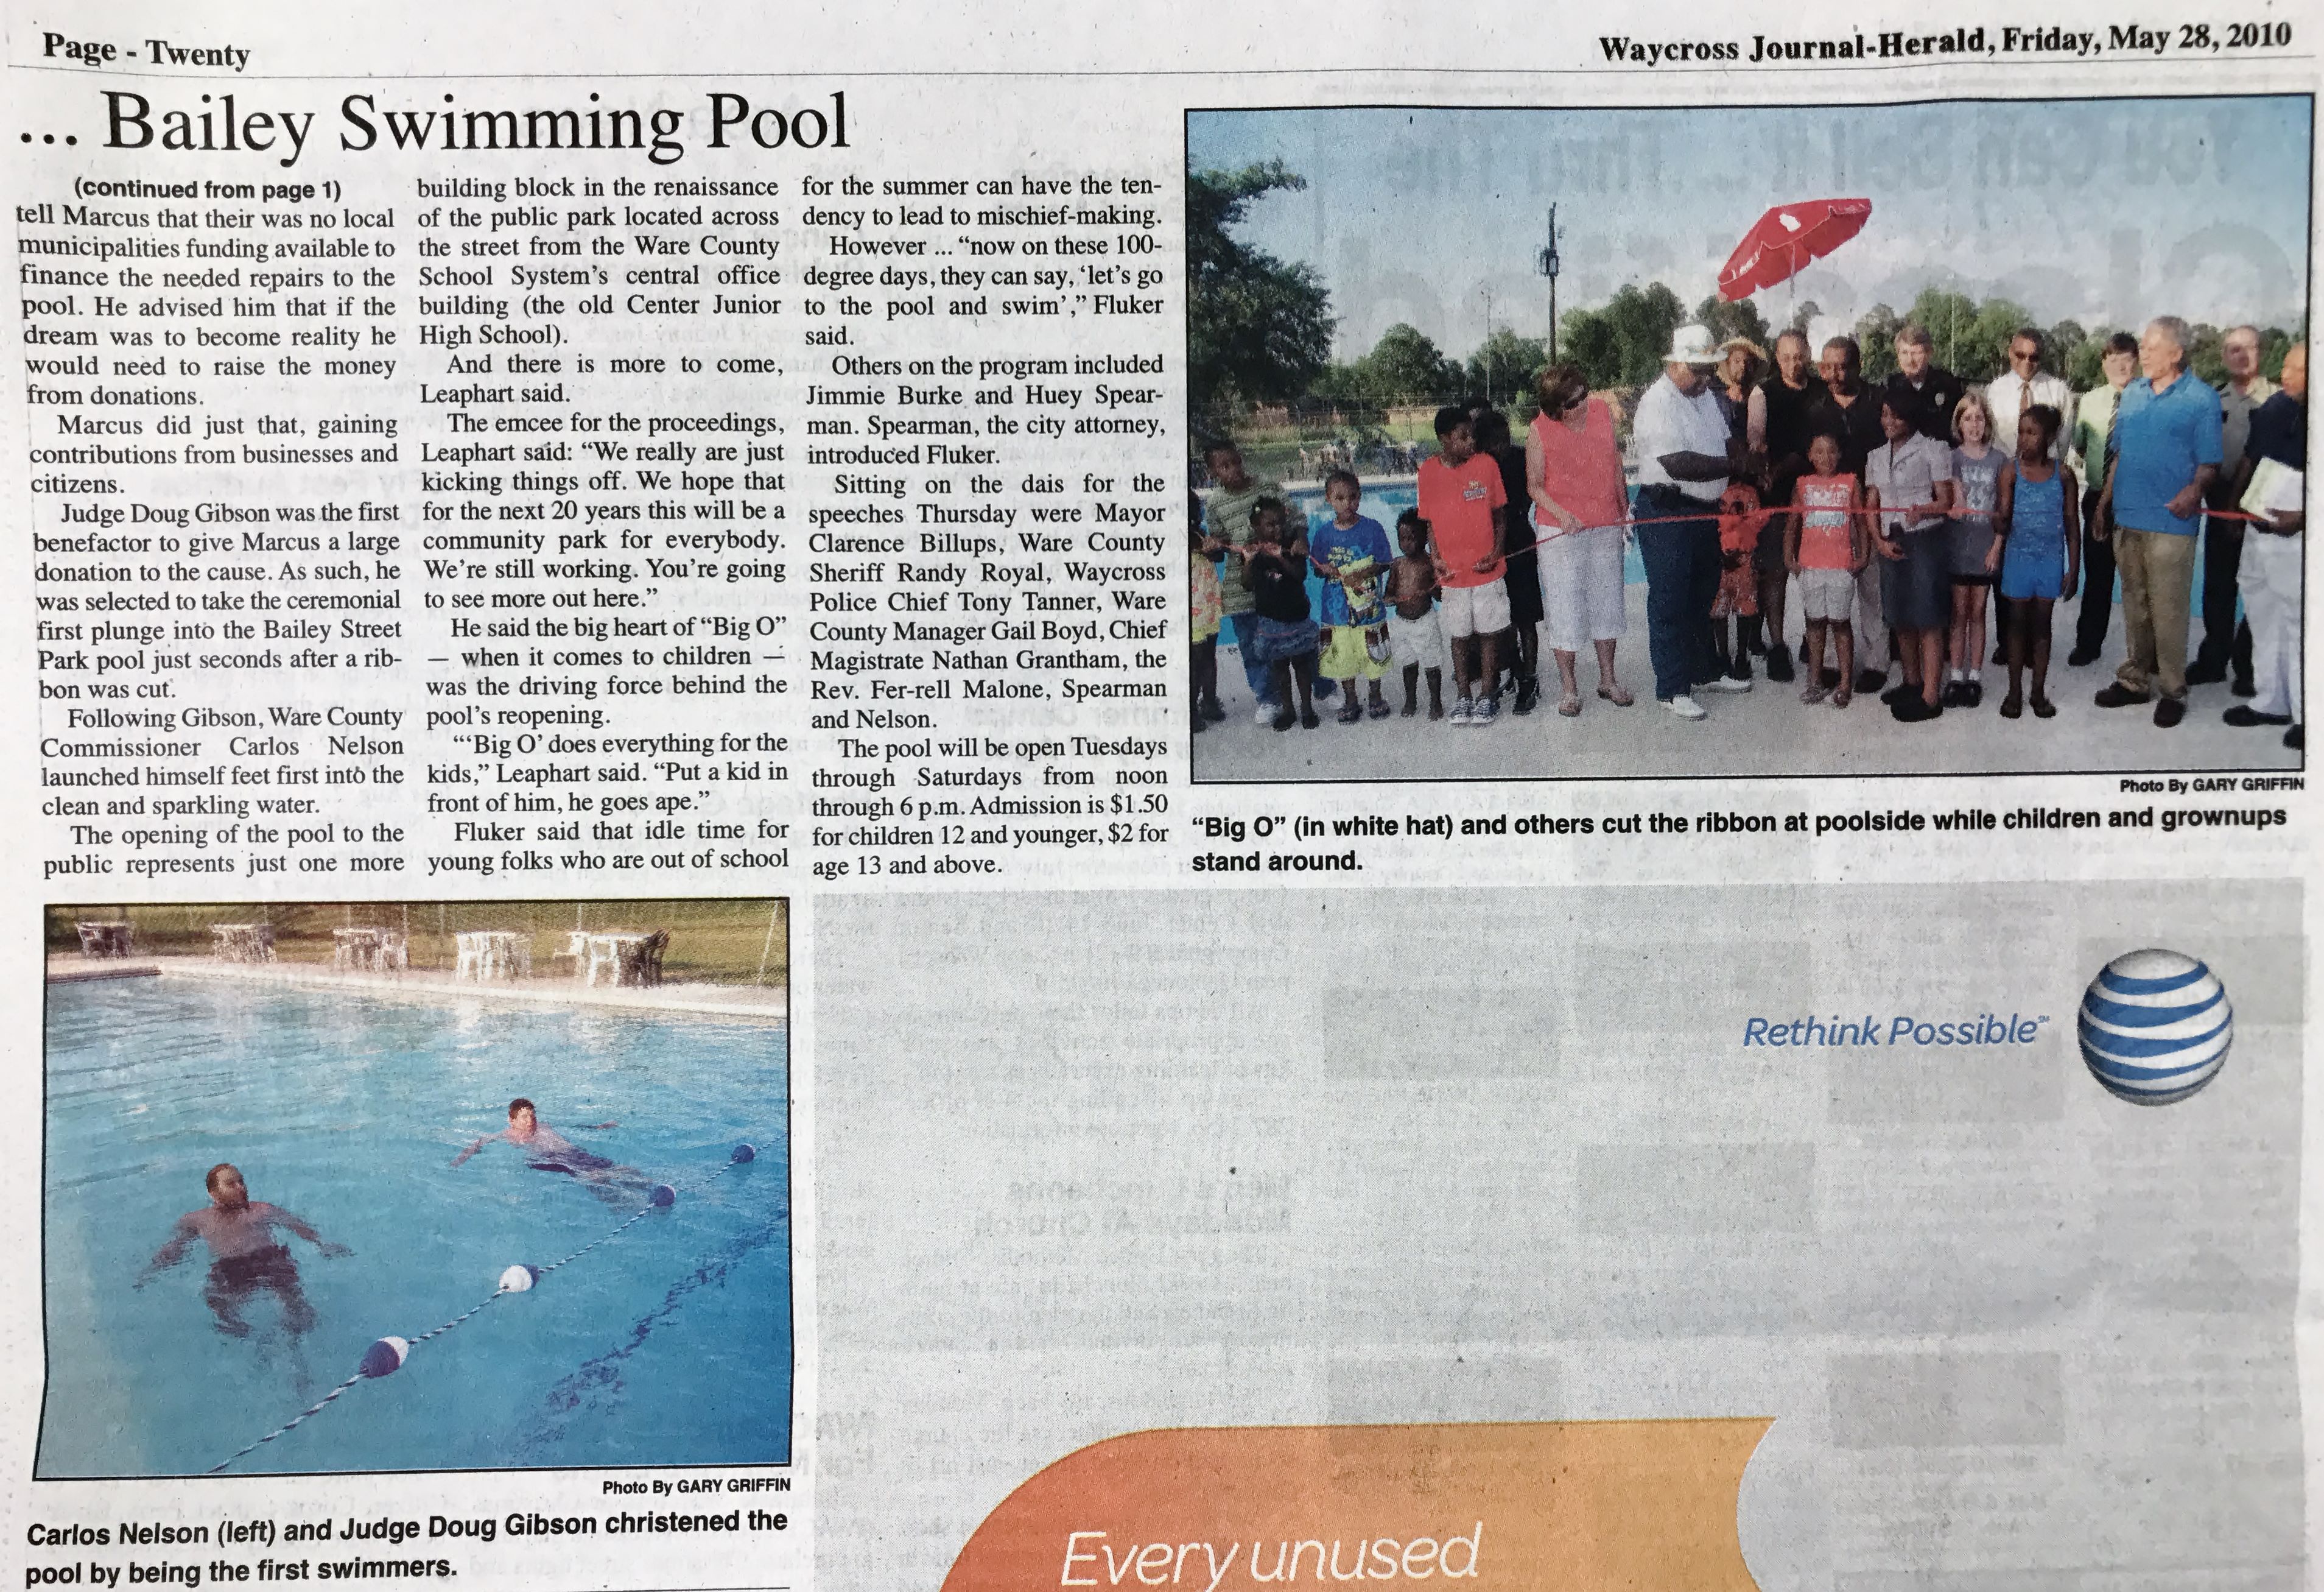 Bailey Park Pool Opens